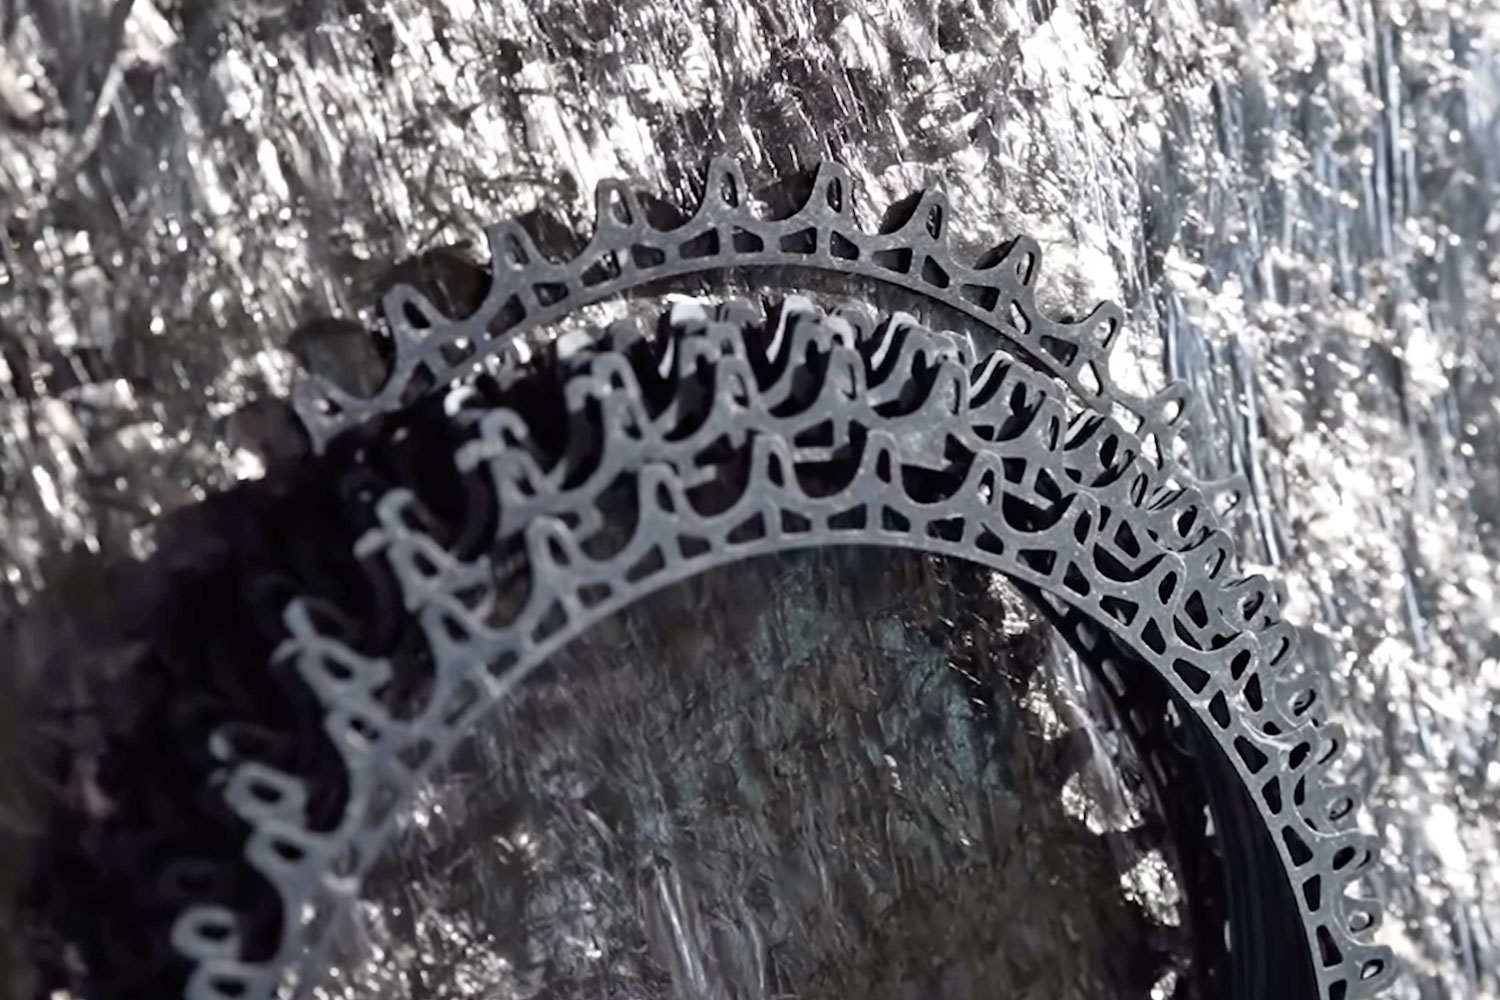 Gemini Rigel ultralight compression molded forged carbon 1x direct mount bike chainrings, inner aluminum teeth